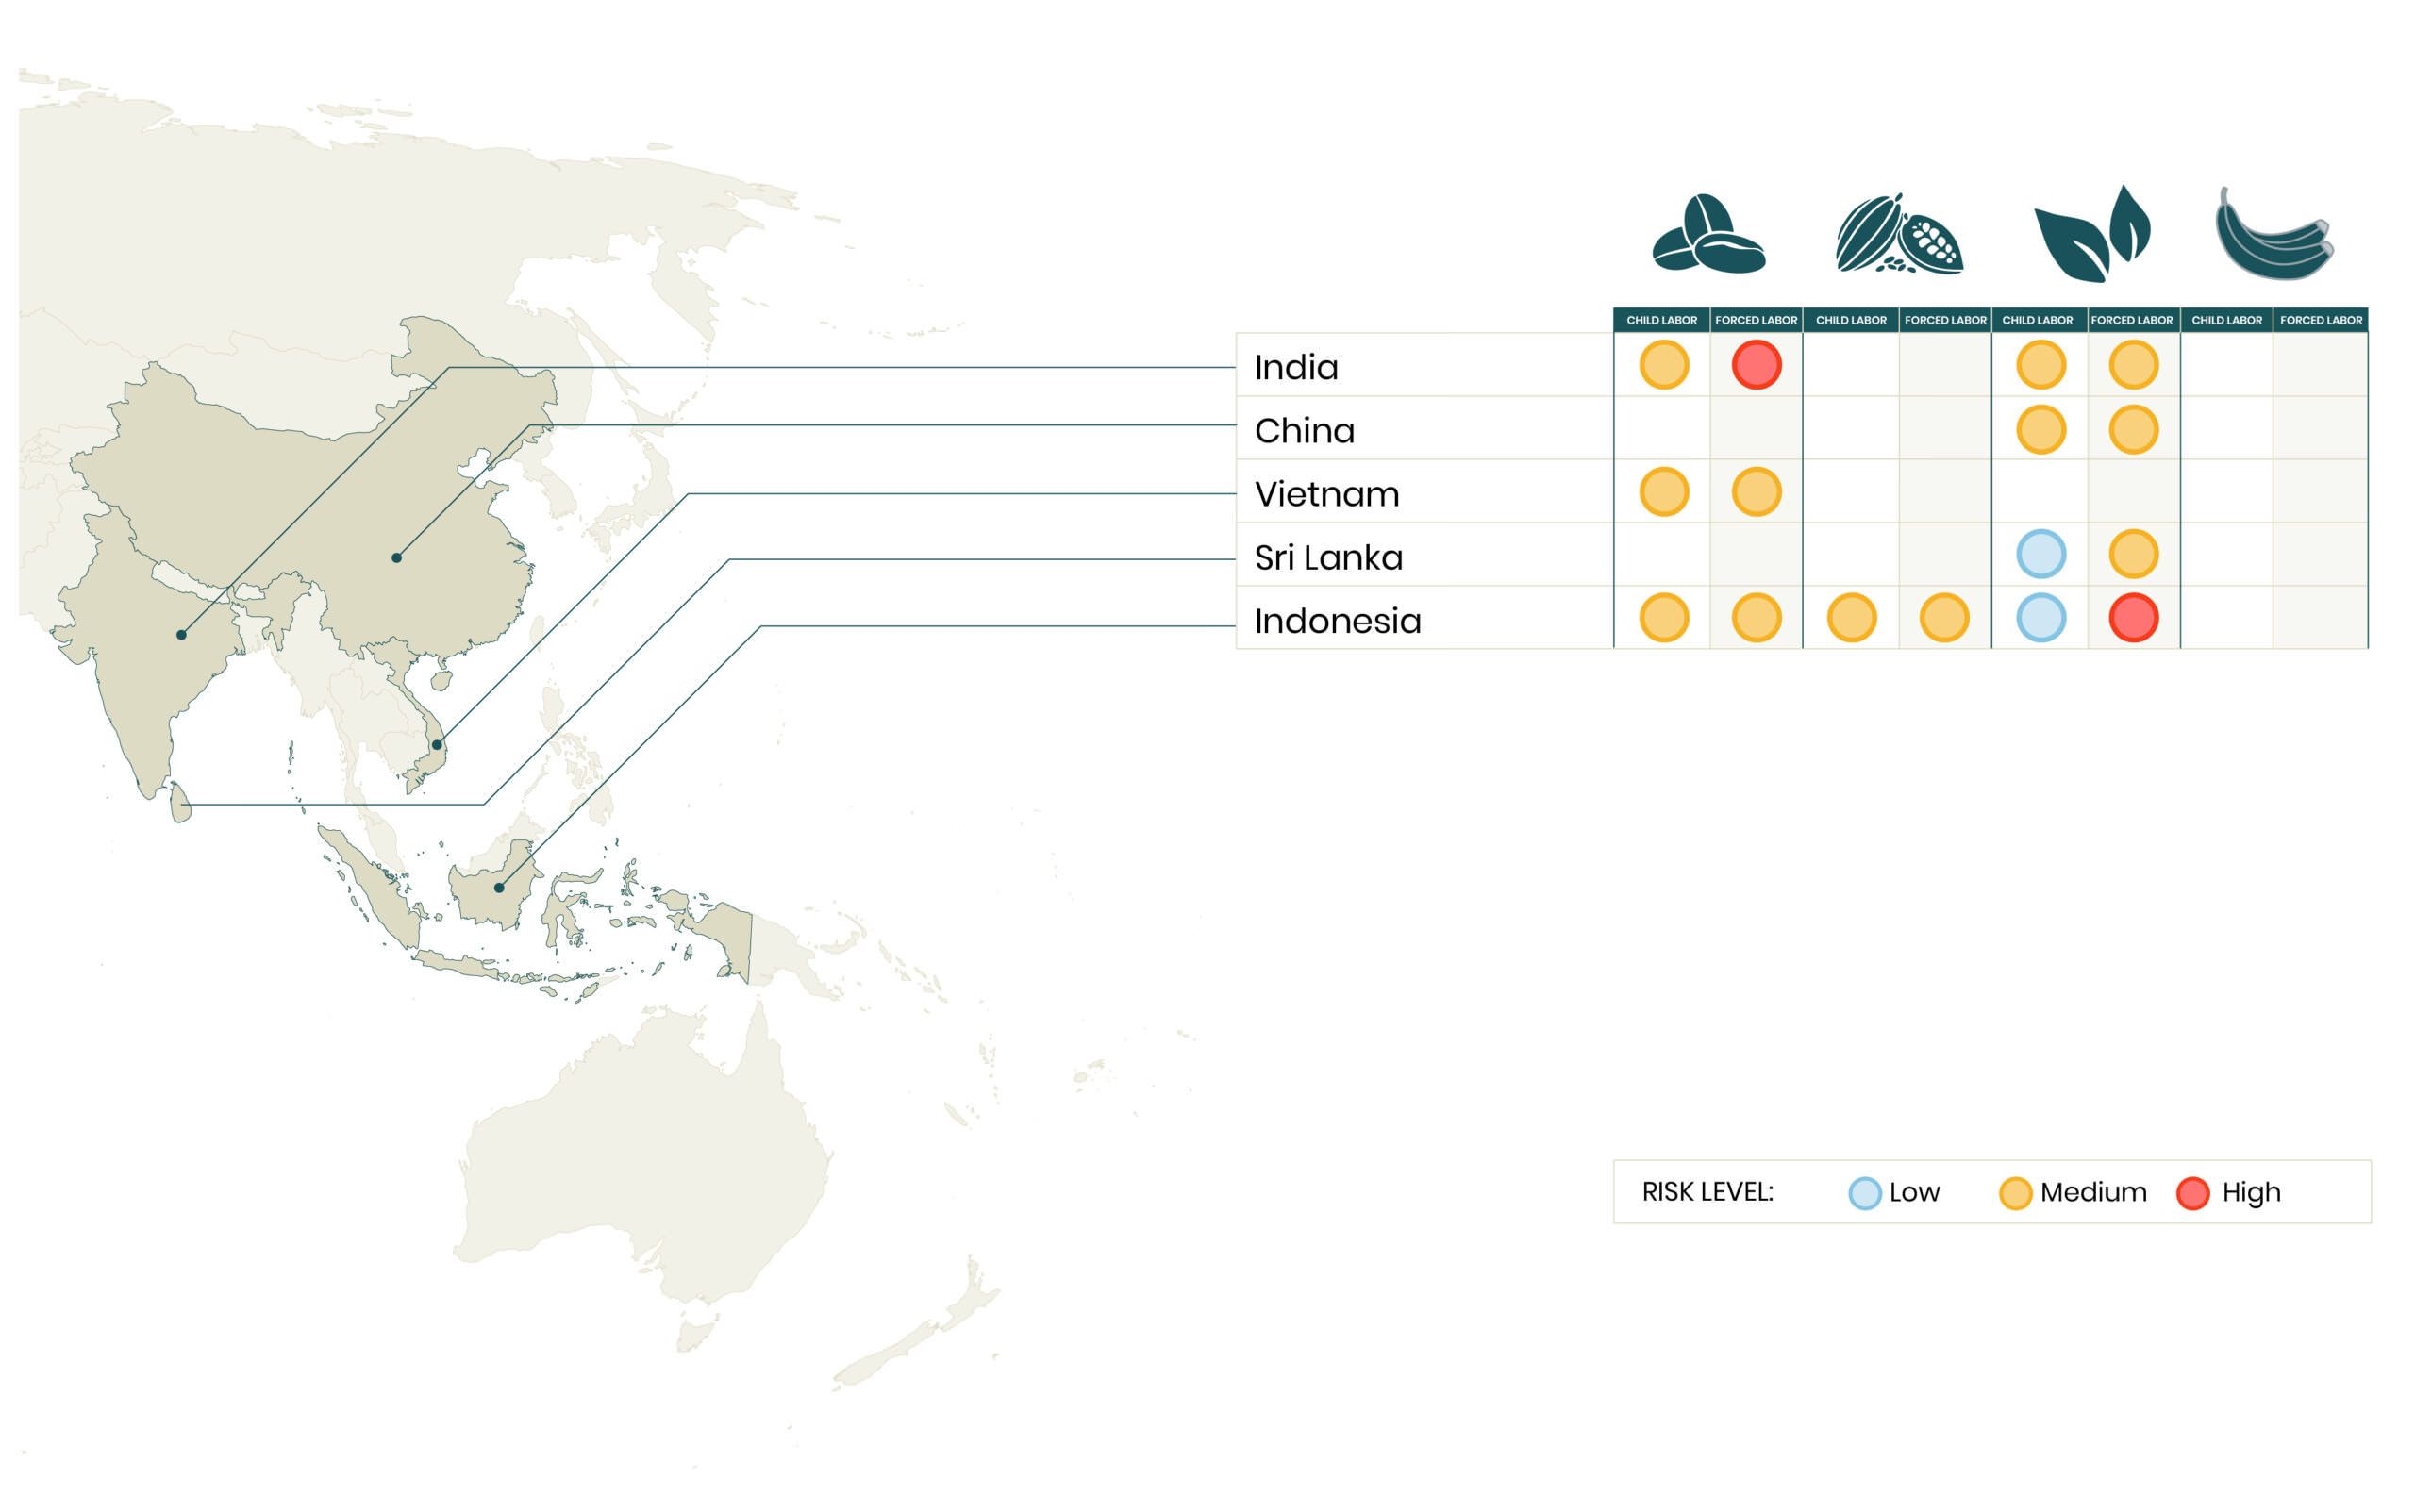 Risk map for child labor and forced labor in Asia